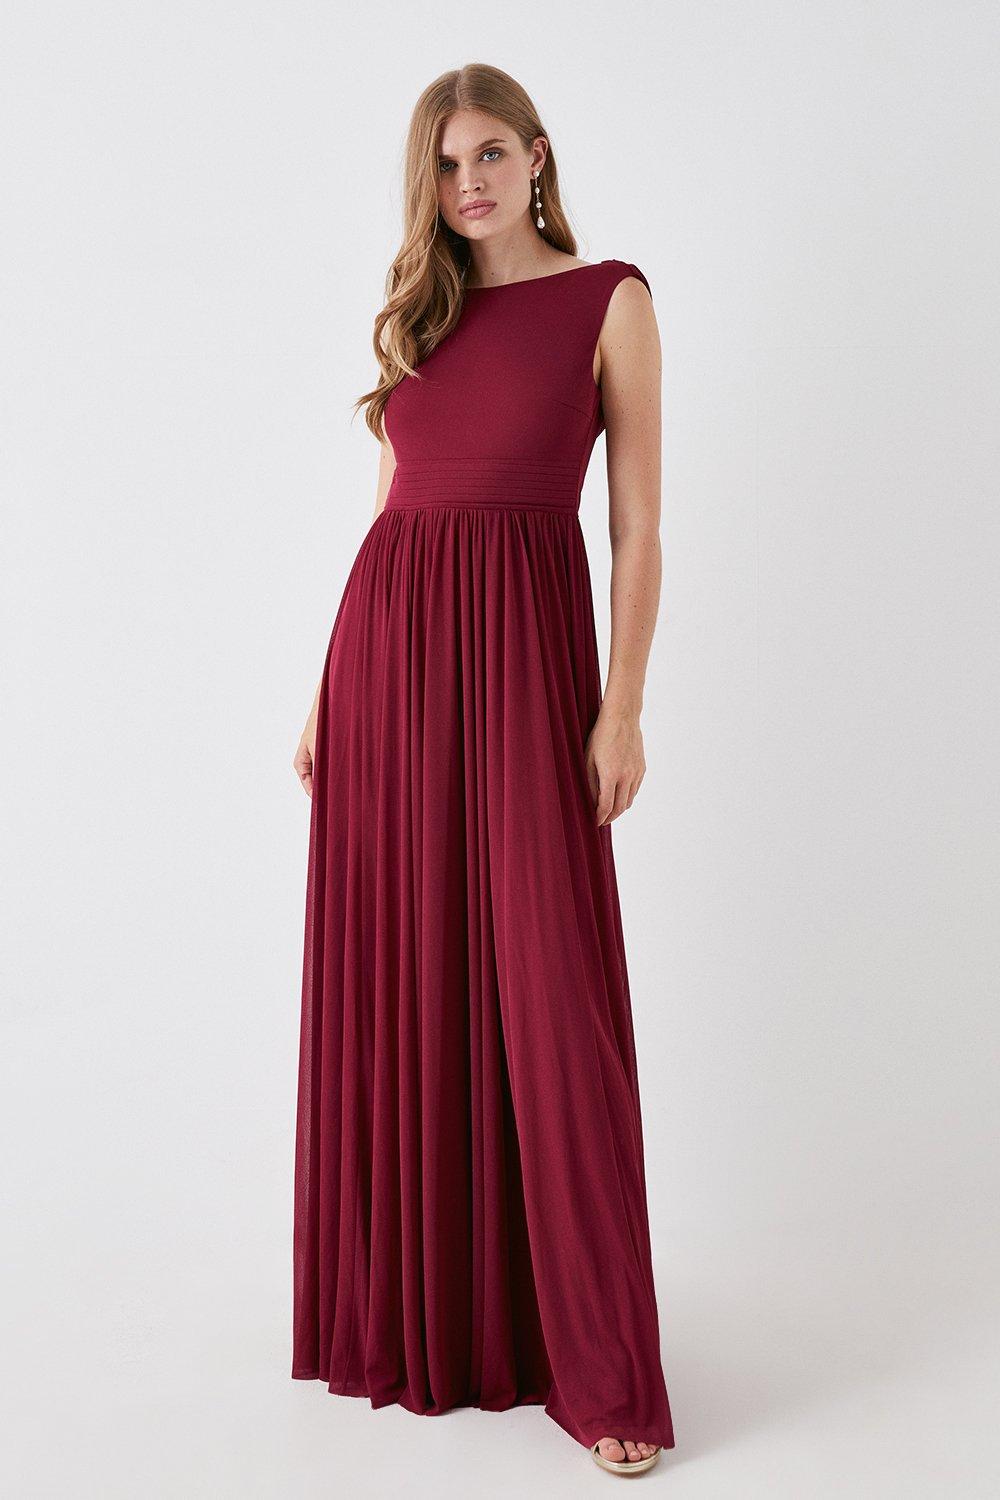 Cowl Back Stretch Mesh Full Skirted Bridesmaids Maxi Dress - Red